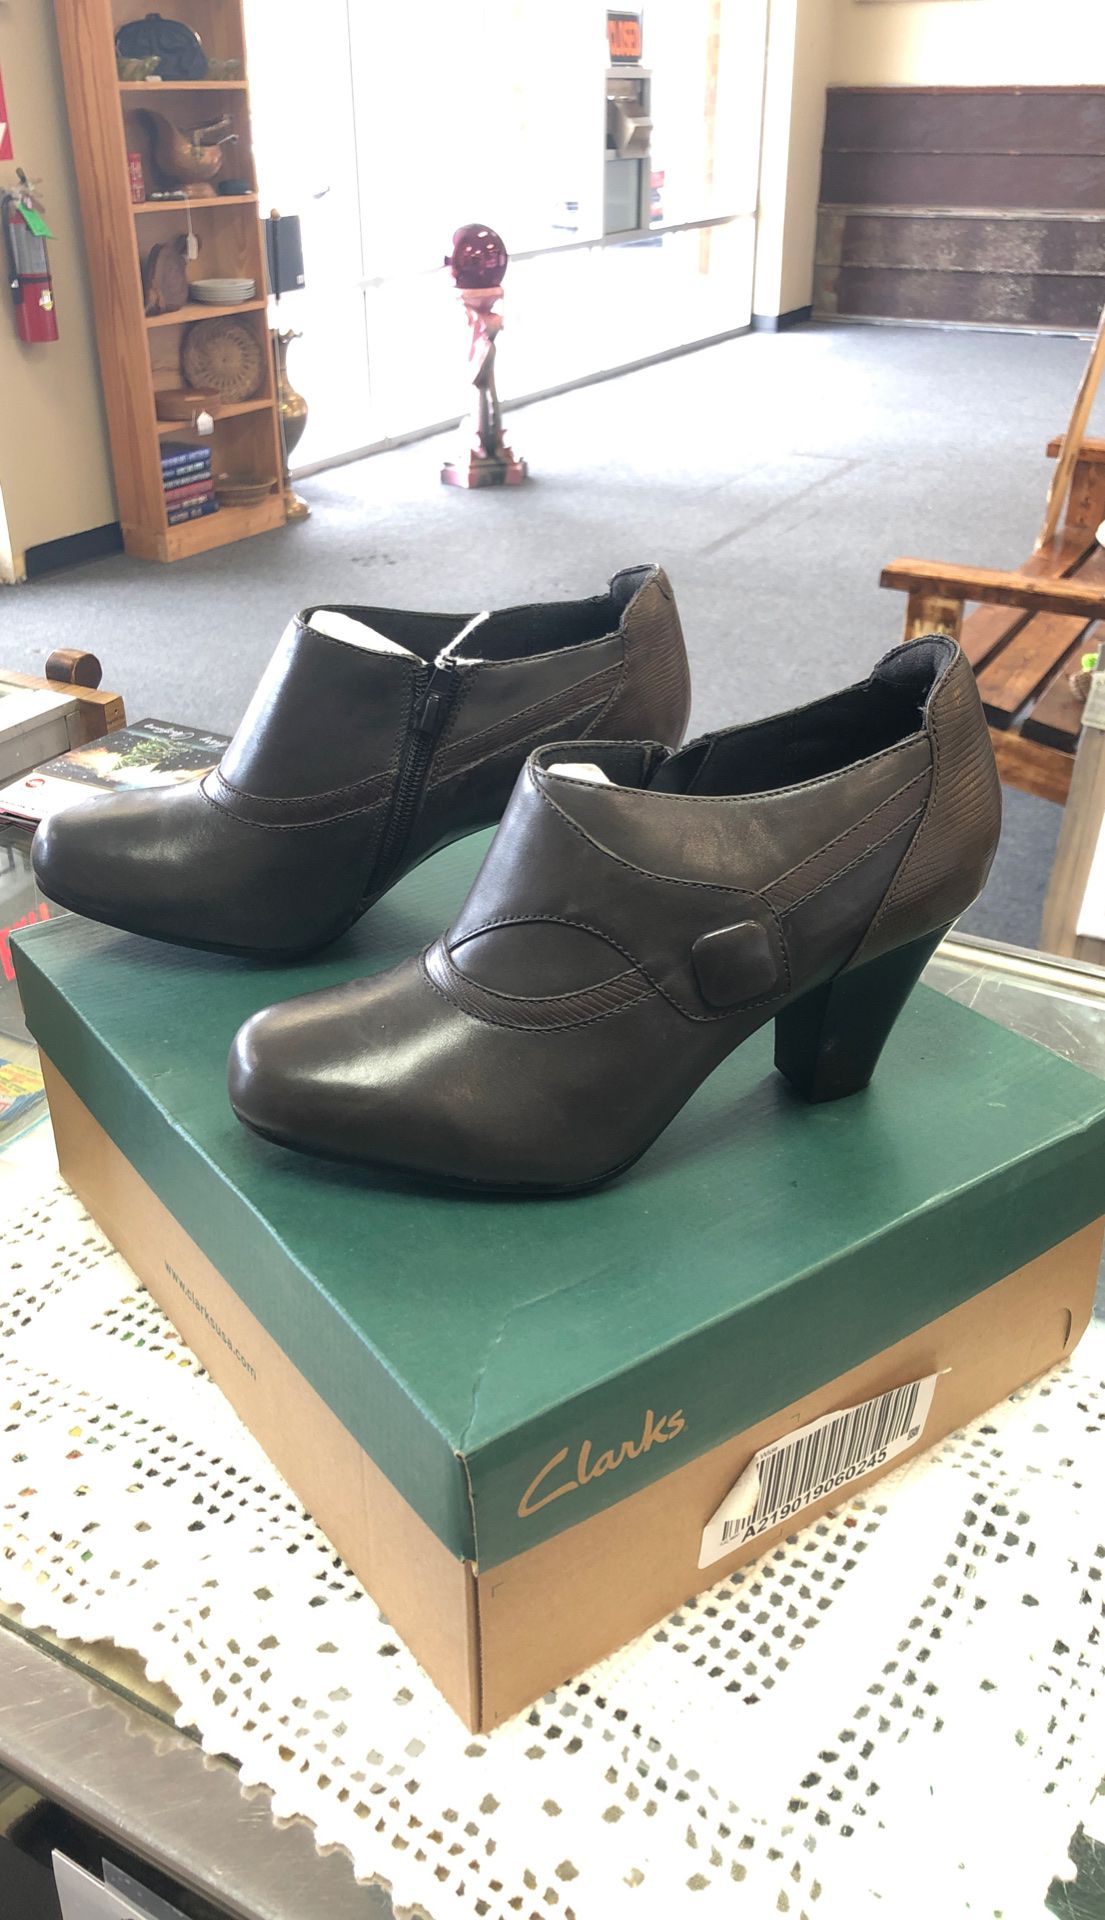 New Clark’s Ankle Boots